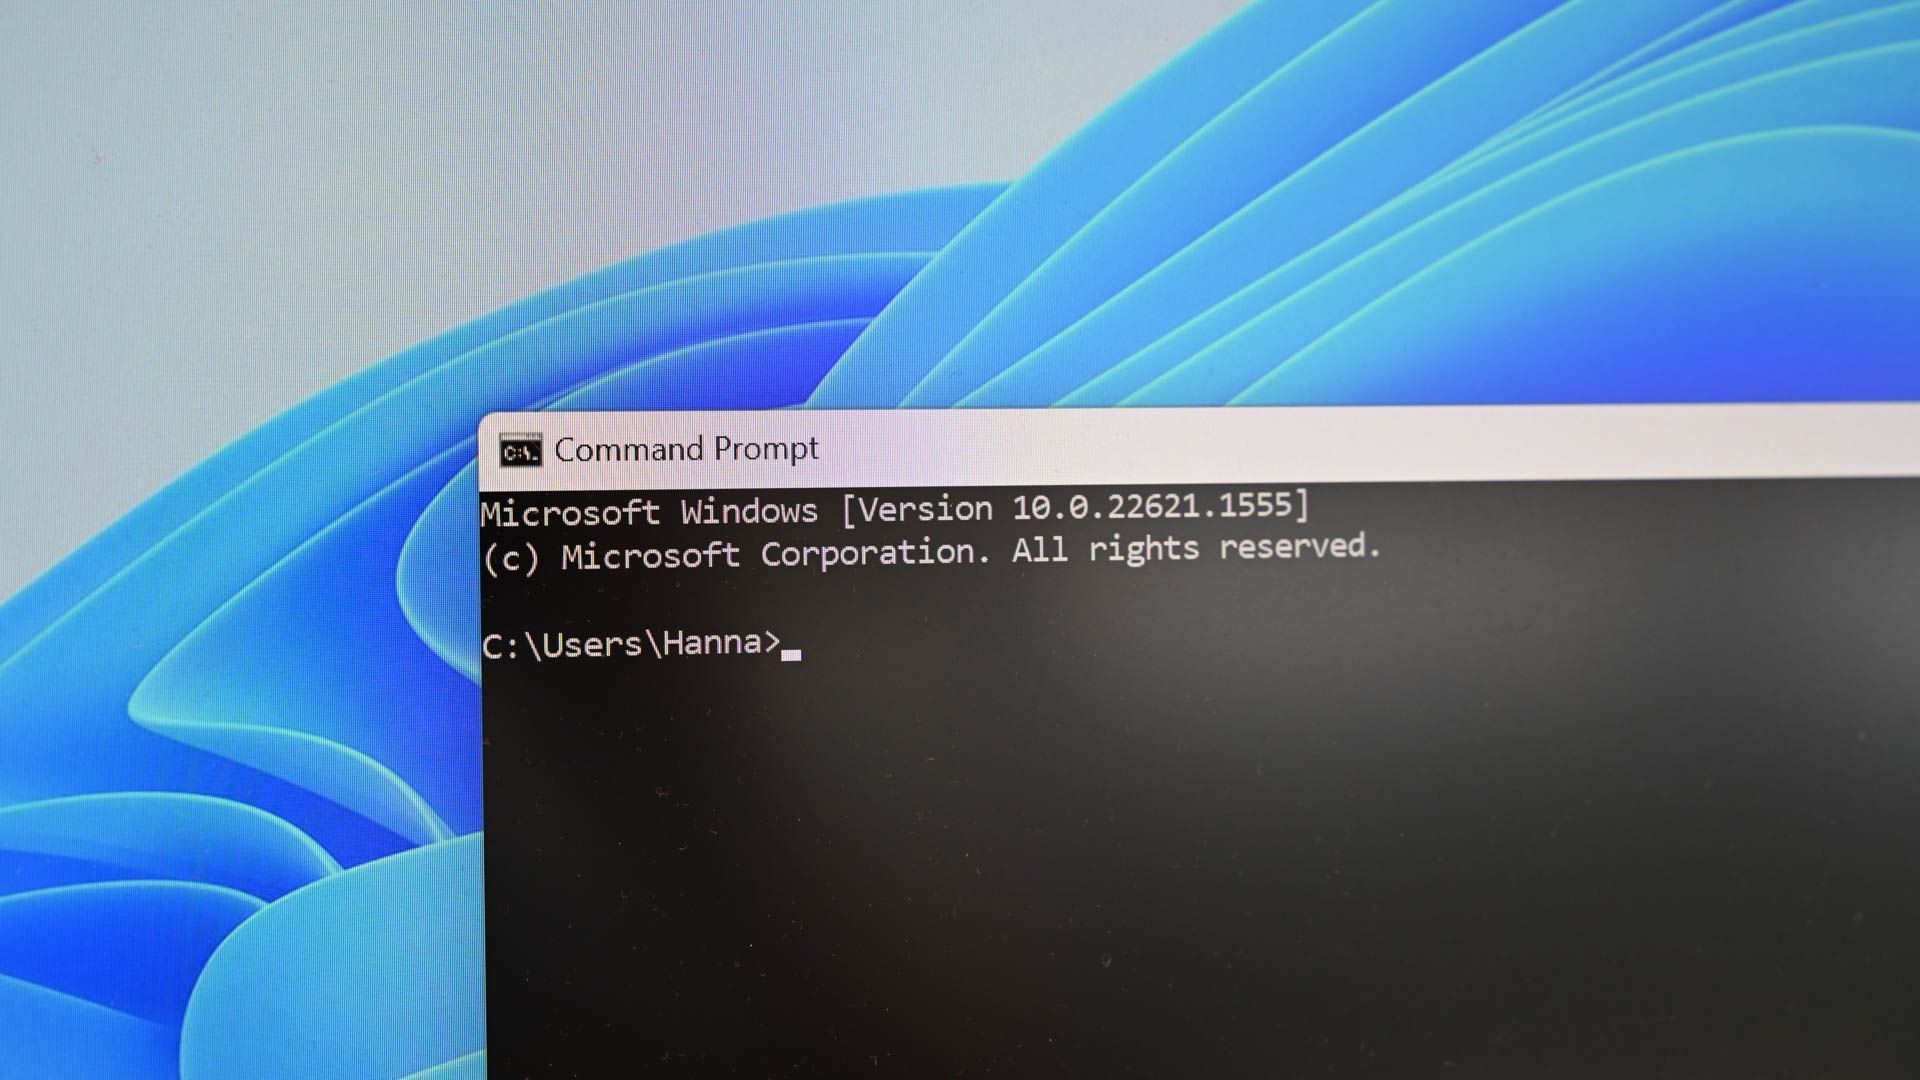 How can I see the Windows command line history in the cmd.exe?